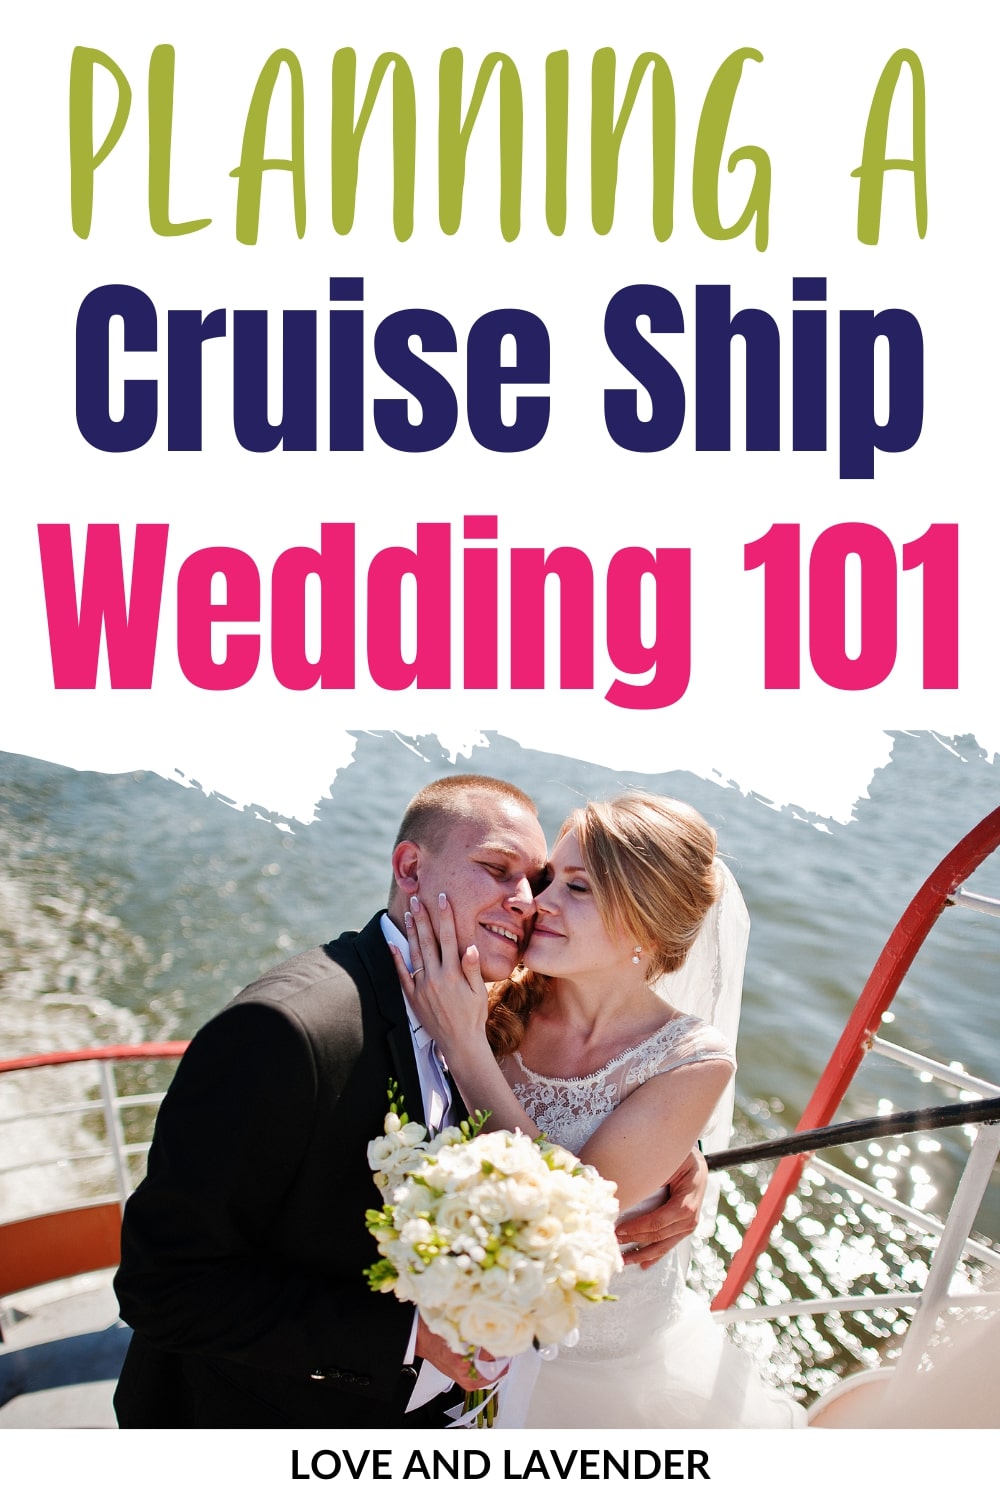 If you’ve decided to take the plunge and get married on a cruise ship, you may think you can mark off choosing the wedding location from the to-do list. However, choosing the right ship is just step one! Let’s look at a few more tips to help you plan your cruise ship wedding.